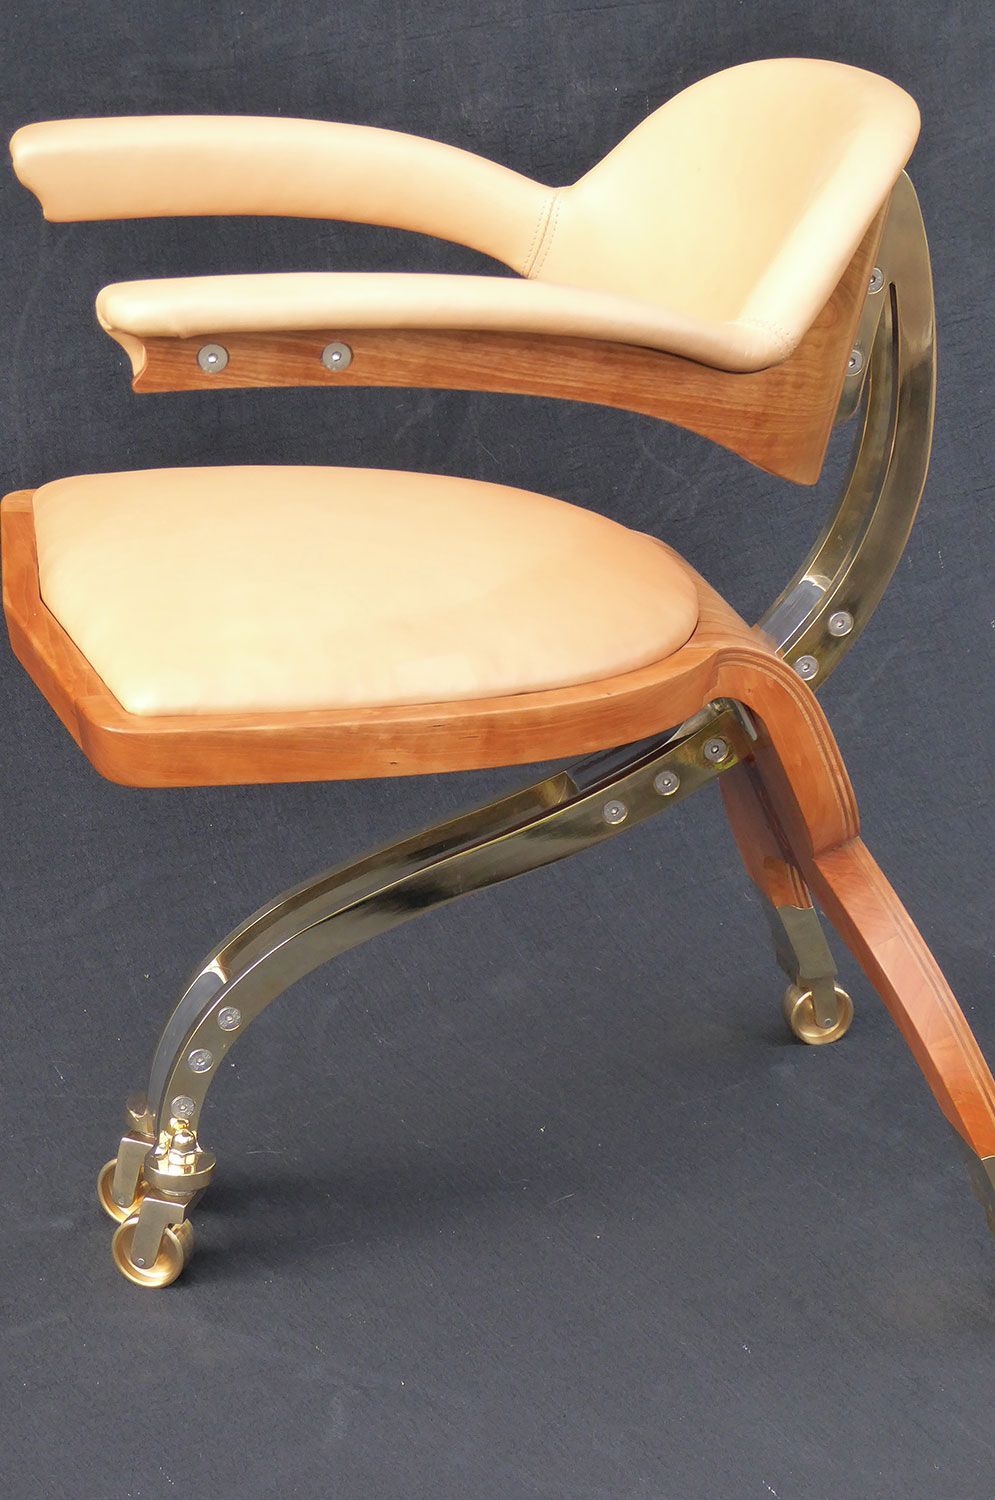 This stunning handcrafted chair is a companion to the E'Scrivo Desk